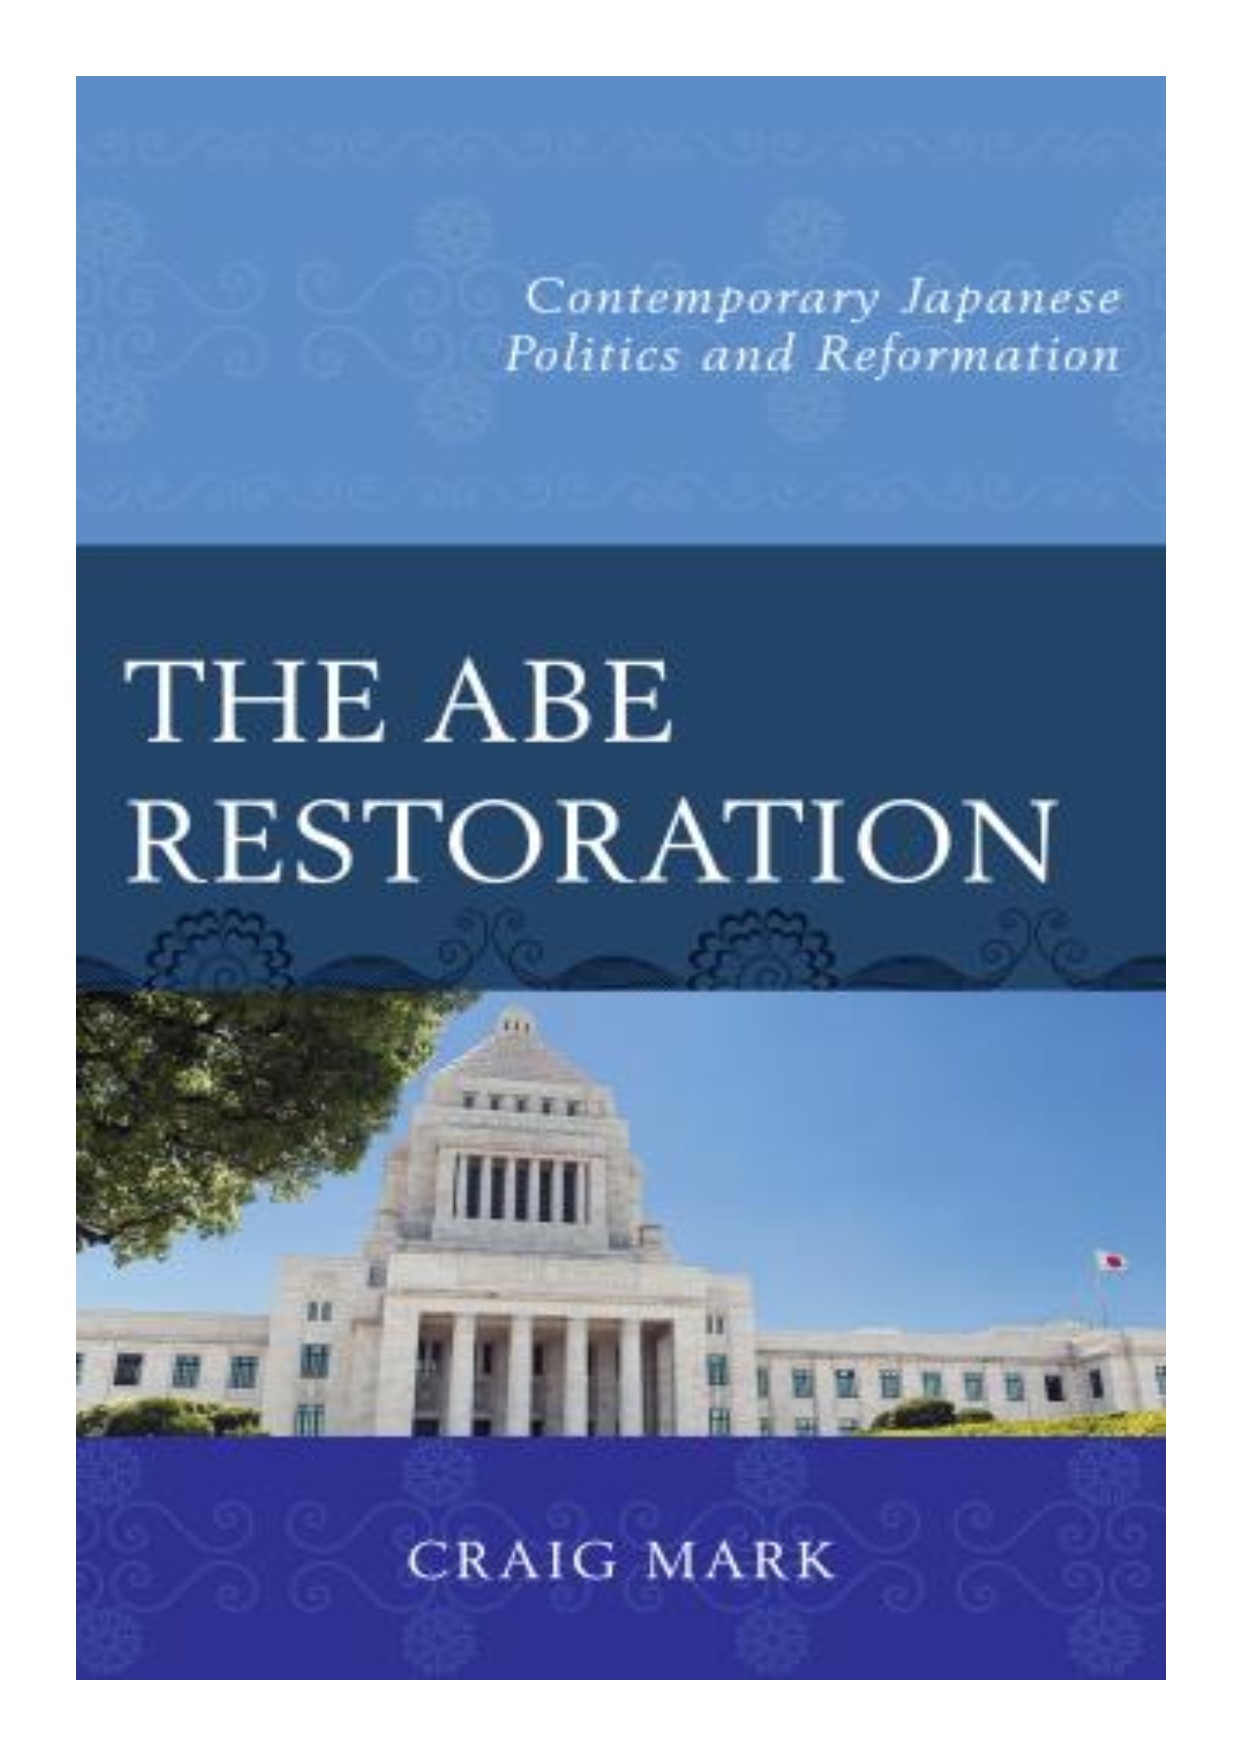 The Abe restoration contemporary Japanese politics and reformation